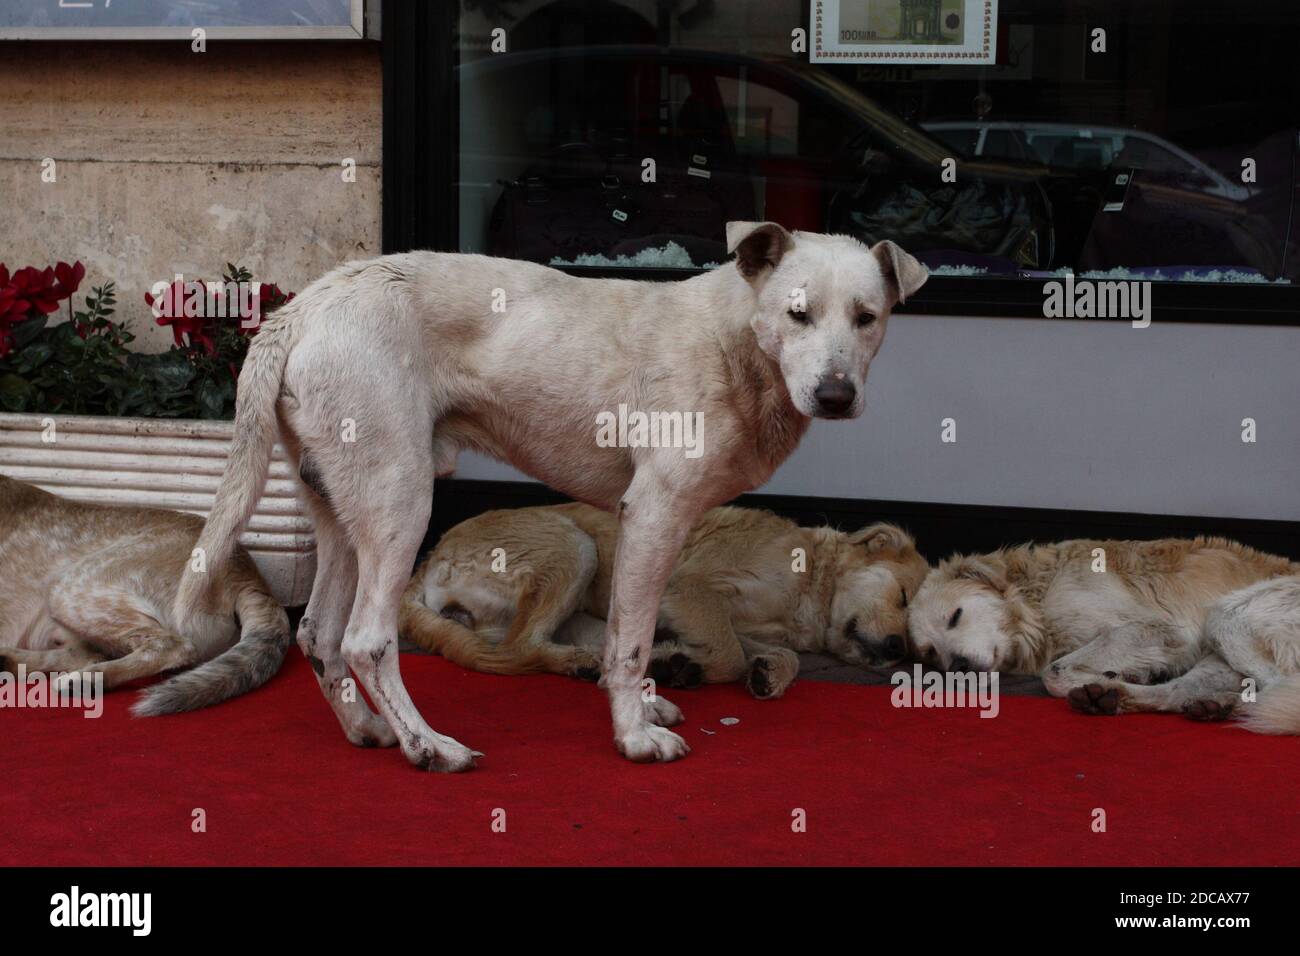 stray dogs in the street in front of the shop windows Stock Photo